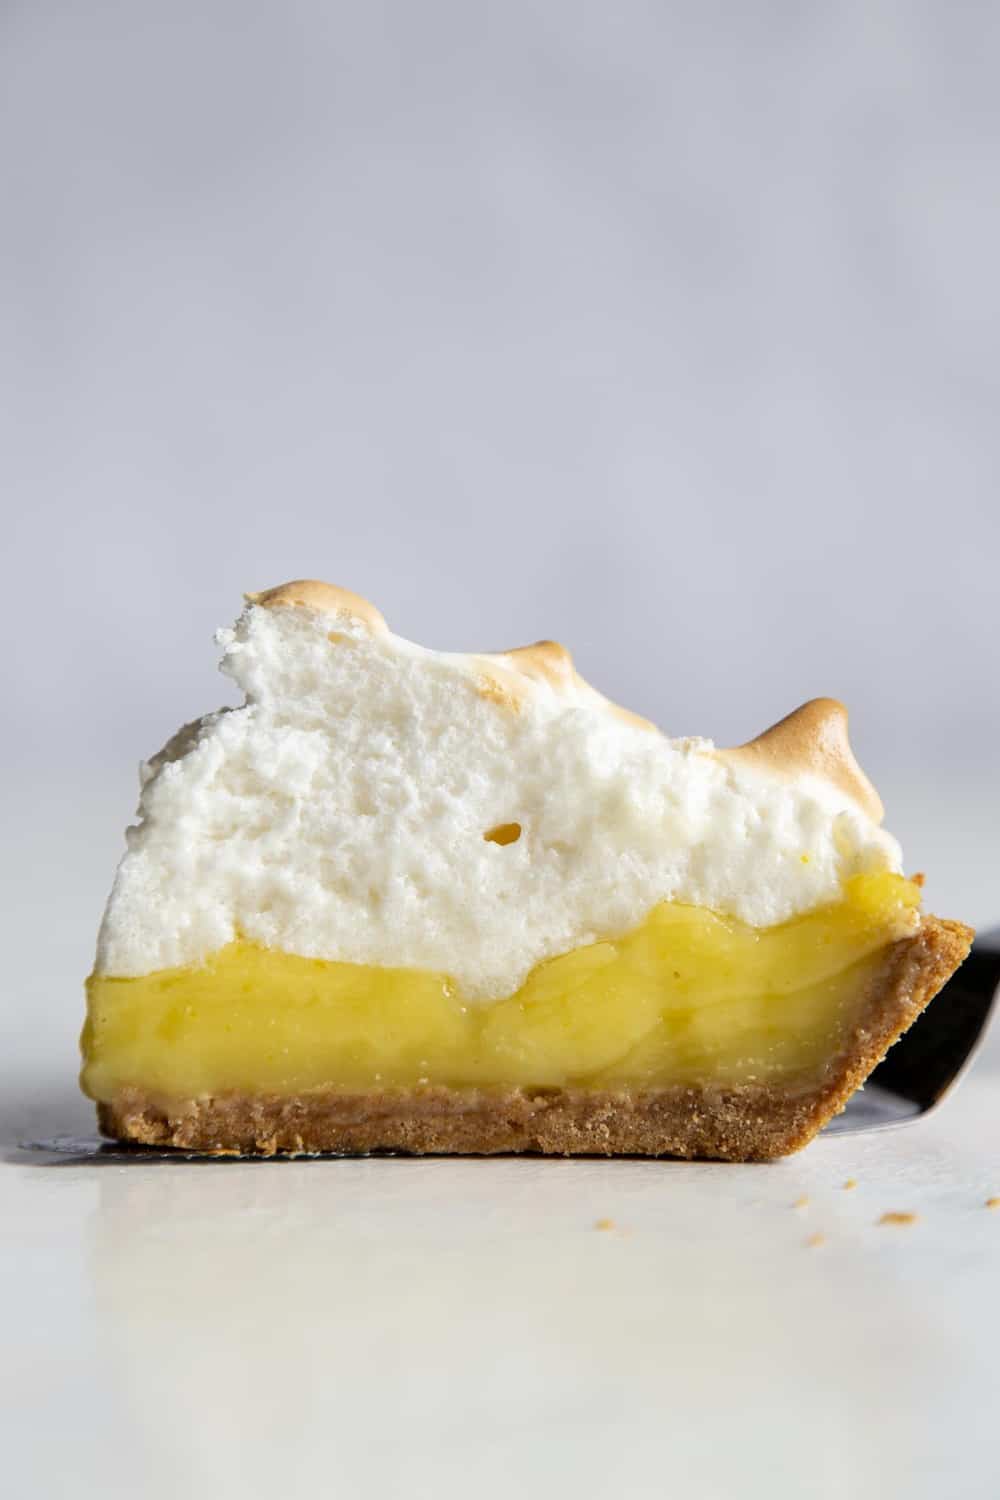 A side view of the layers of lemon and meringue in the slice of pie.